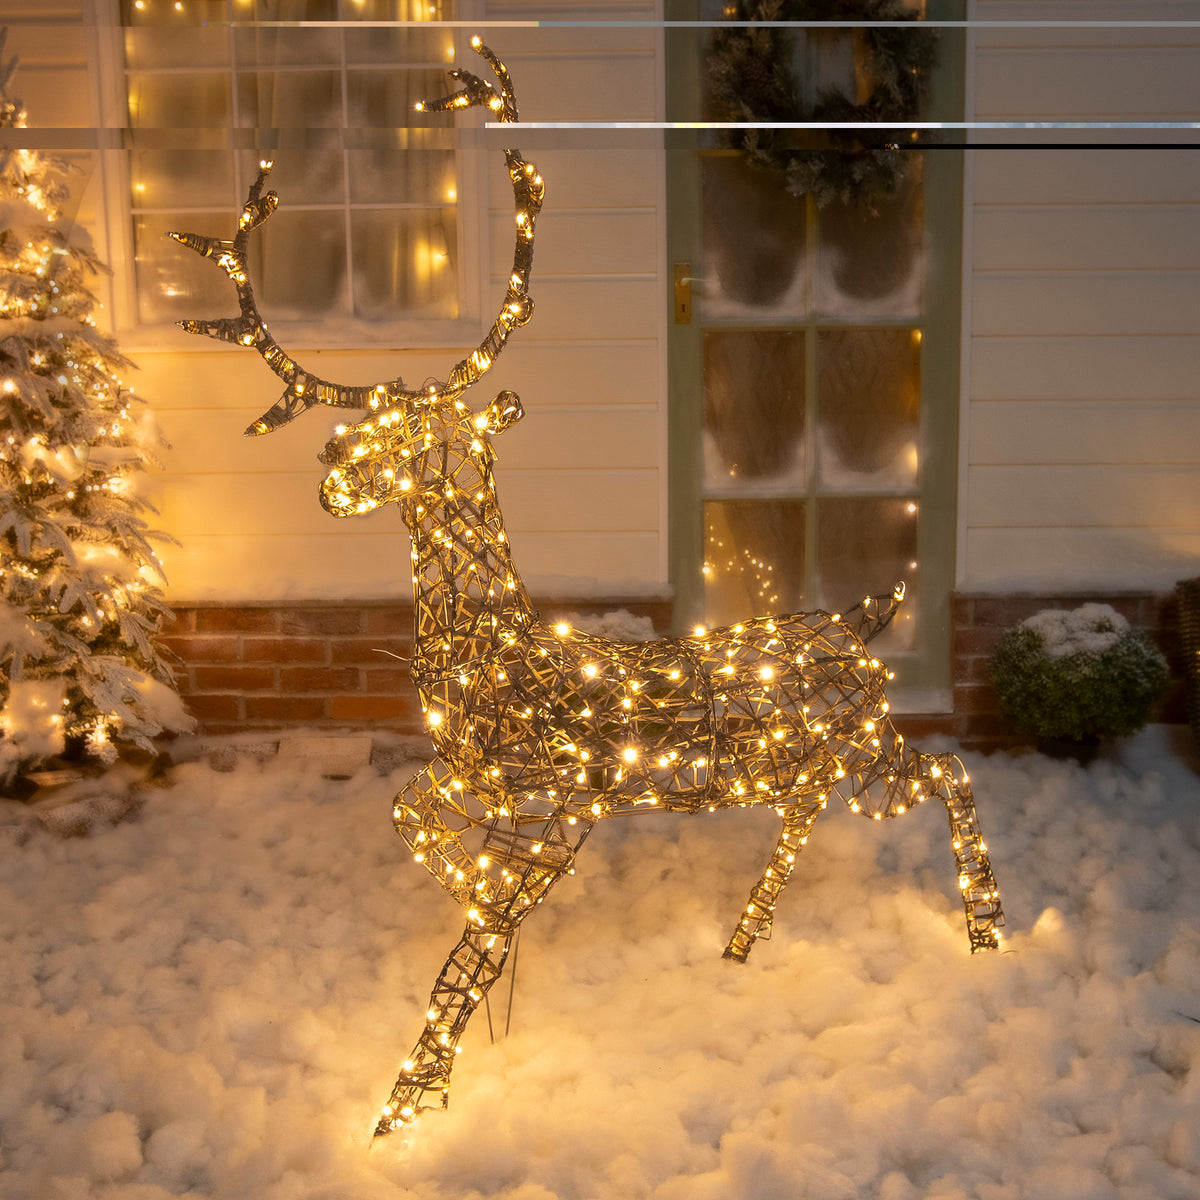 Christmas Reindeer Light - 1.4M Grey Wicker Outdoor Light Up Stag with 330 White LEDs